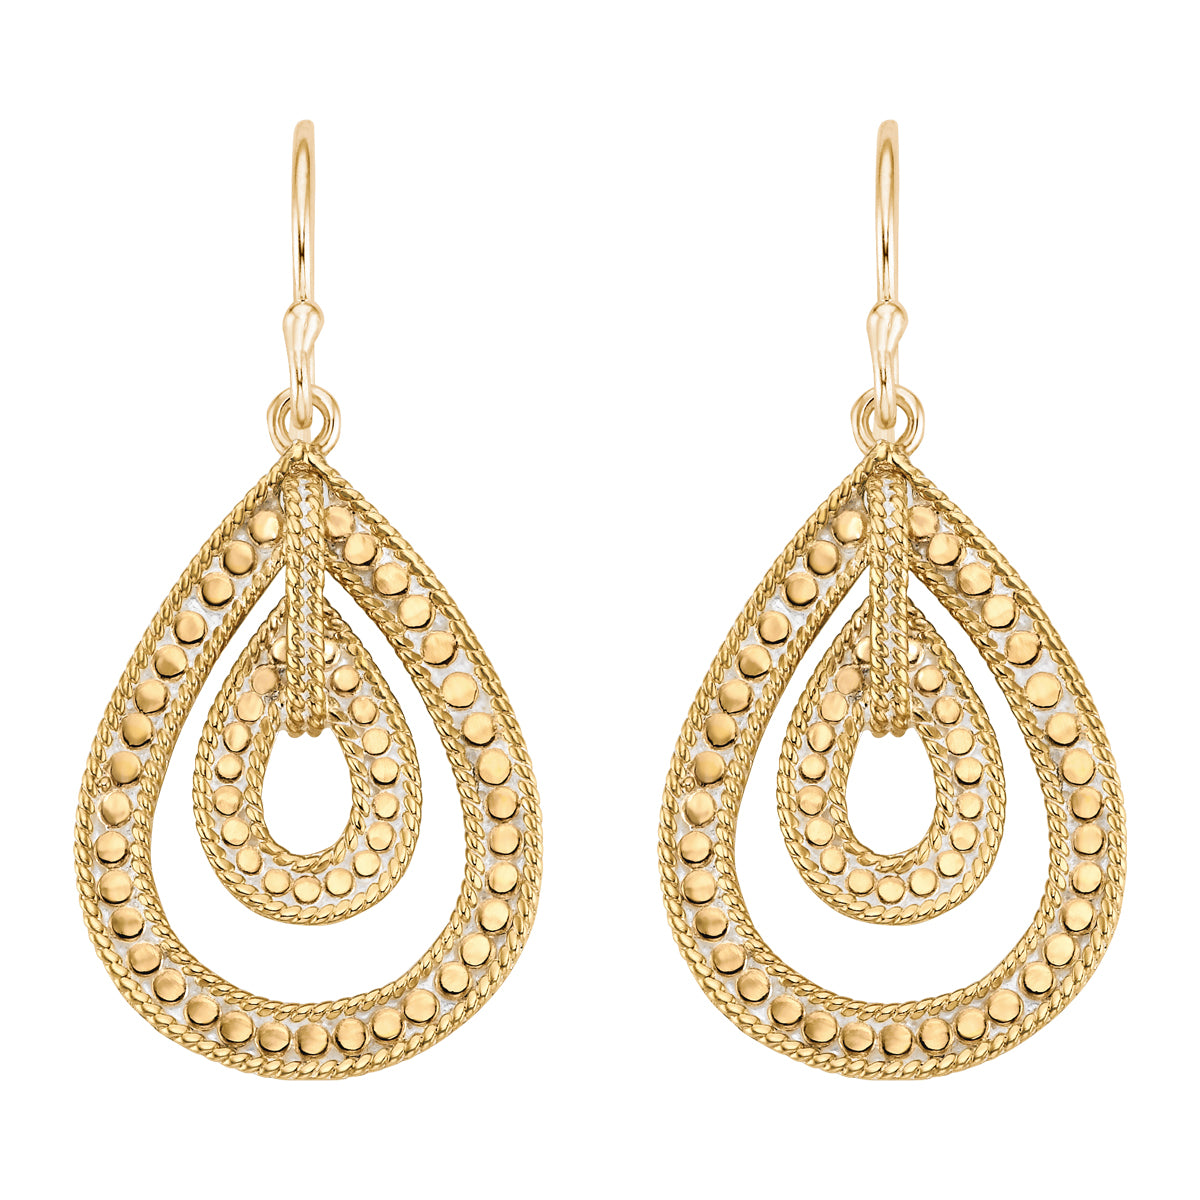 Ana Beck 18k gold plated and sterling silver Double Open Teardrop Earrings - Gold